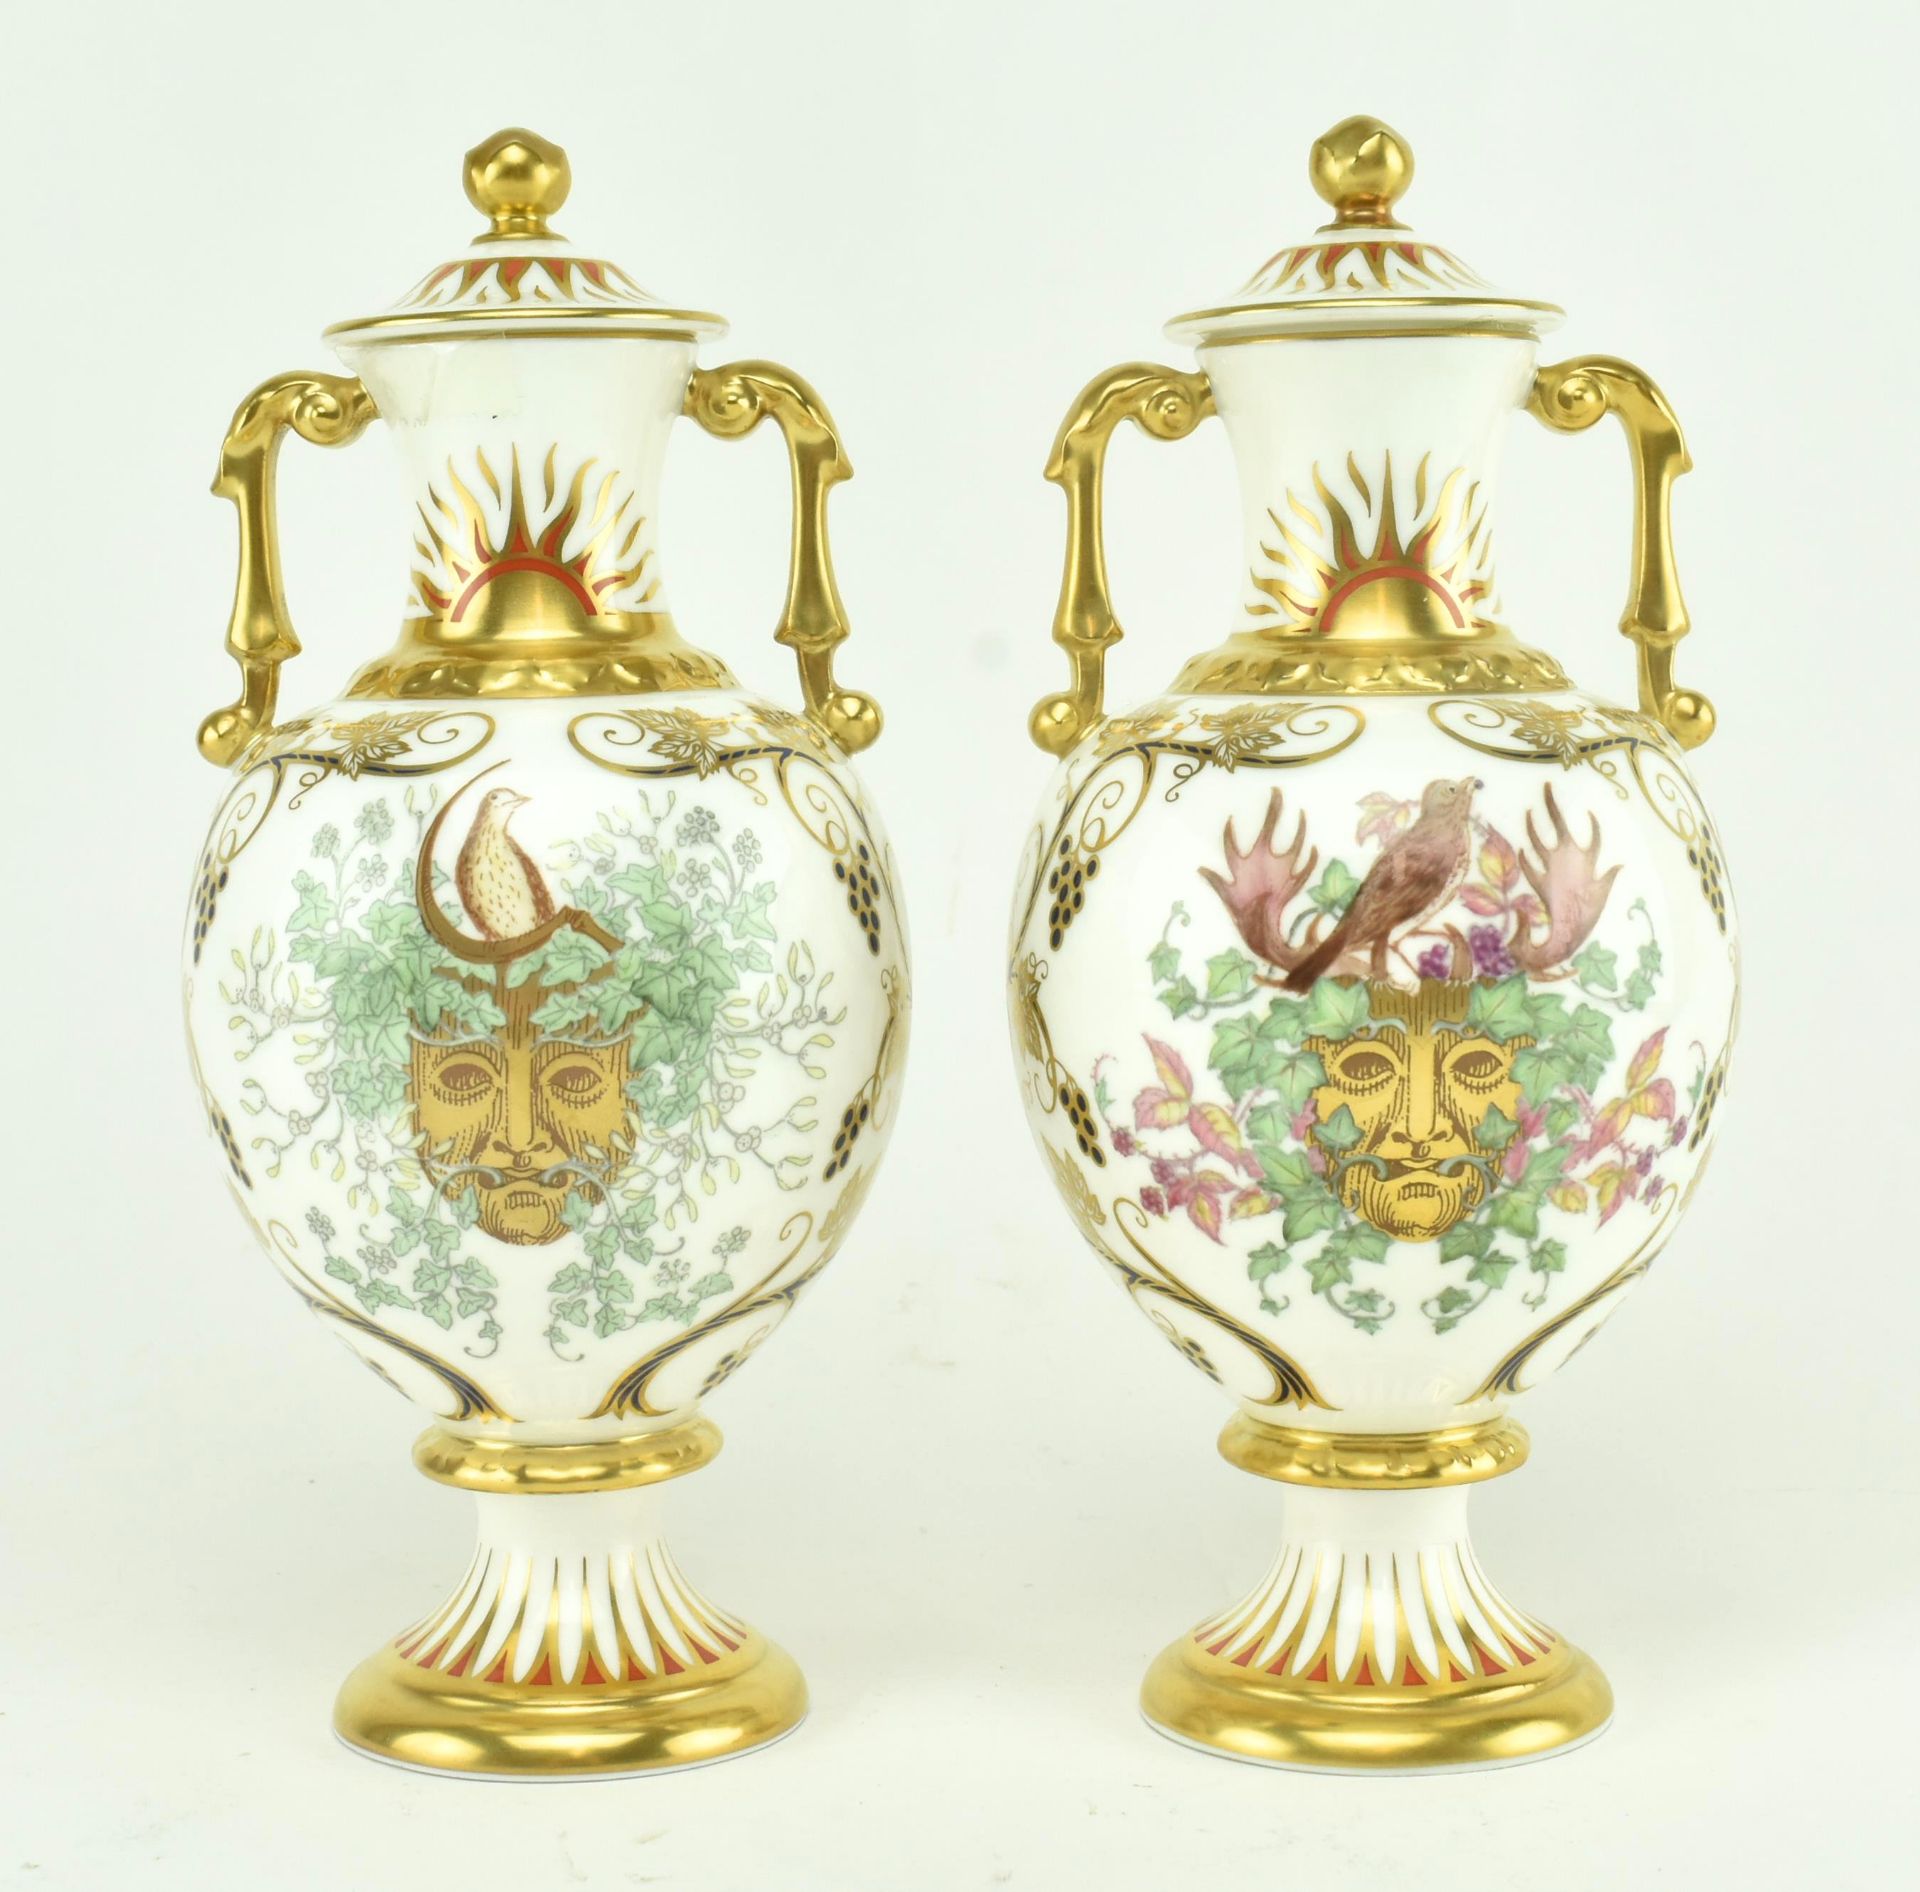 PAIR OF CONTEMPORARY ROYAL CROWN DERBY URNS / VASES